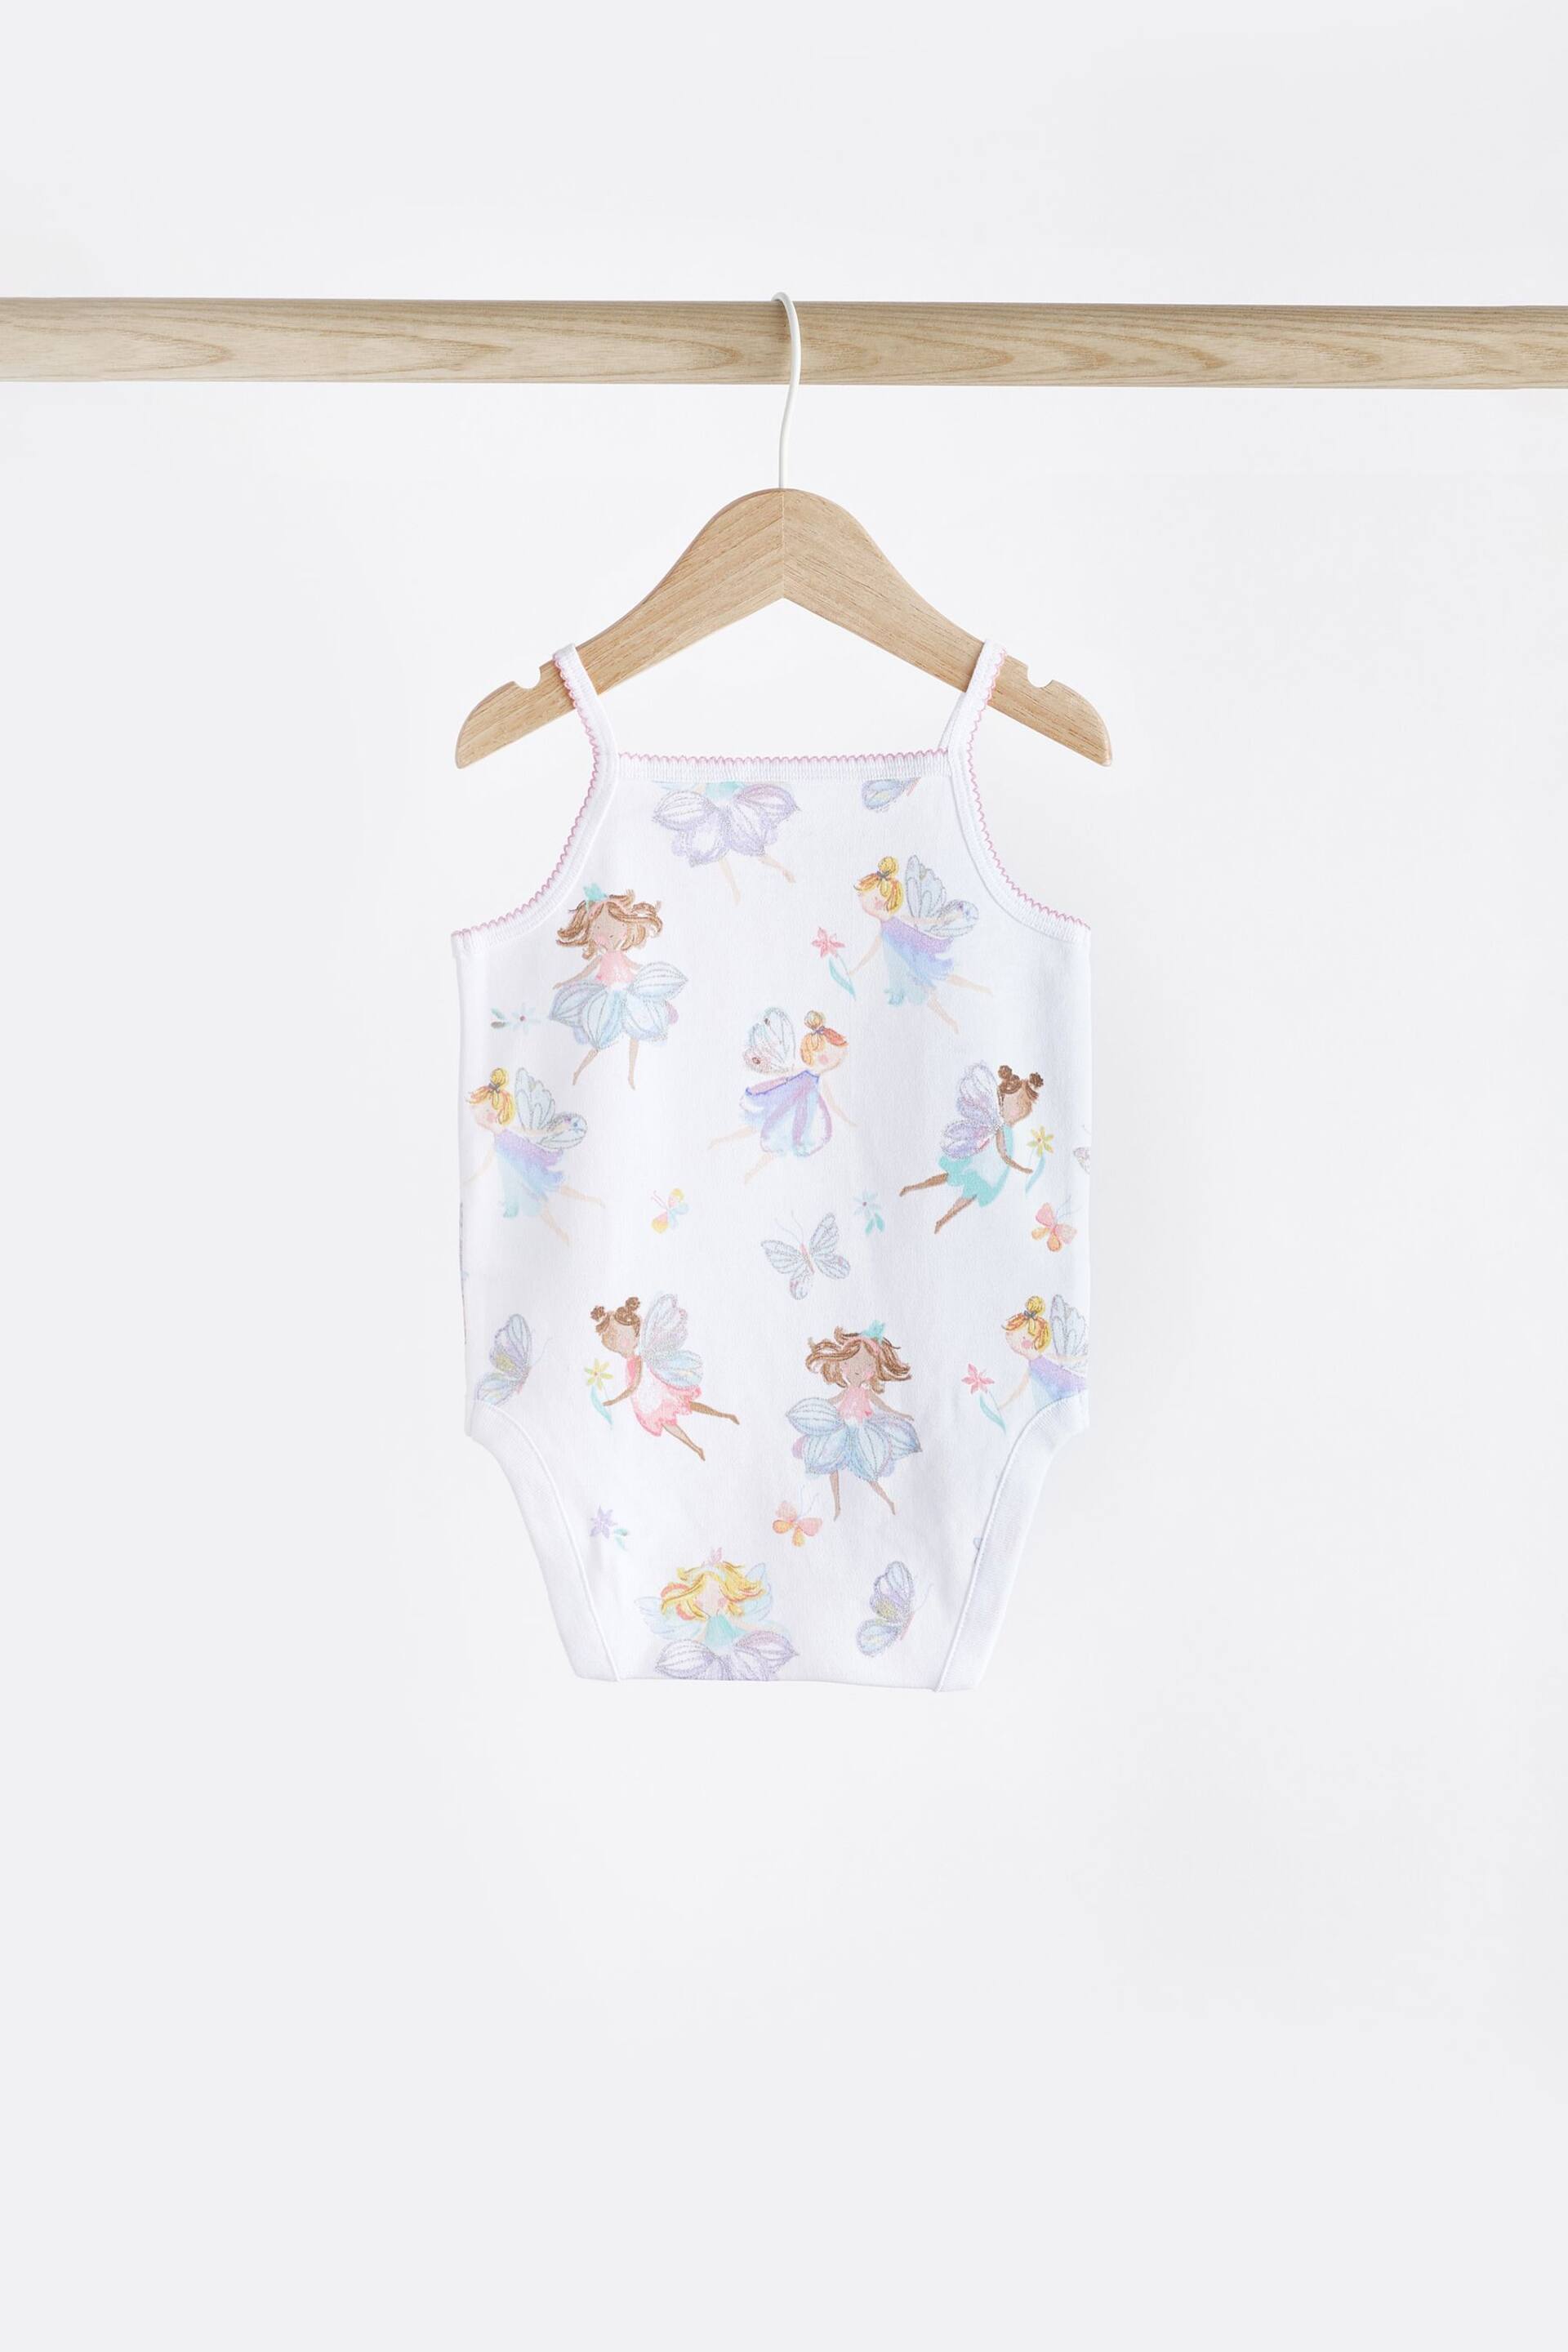 White Fairy Baby Strappy Vest Bodysuits 5 Pack - Image 8 of 12